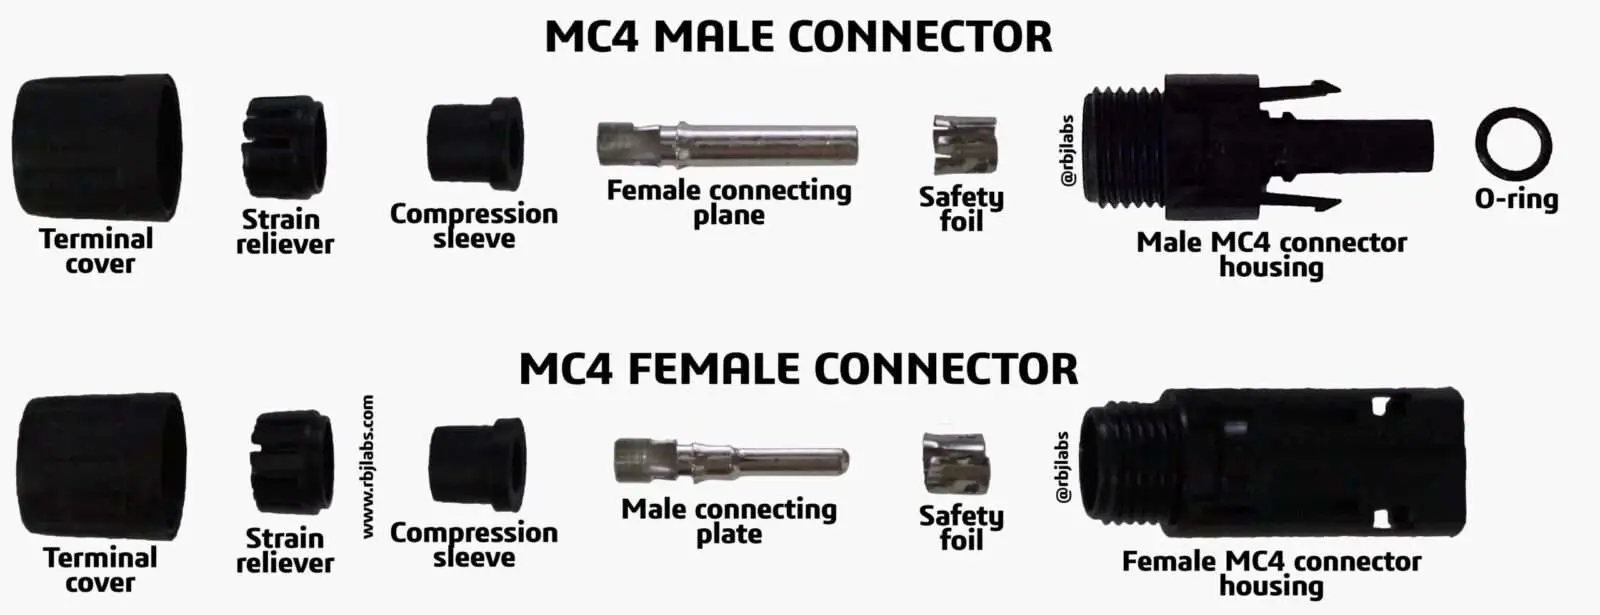 parts-of-a-connector-mc4-male-and-parts-of-a-connector-mc4-female-min